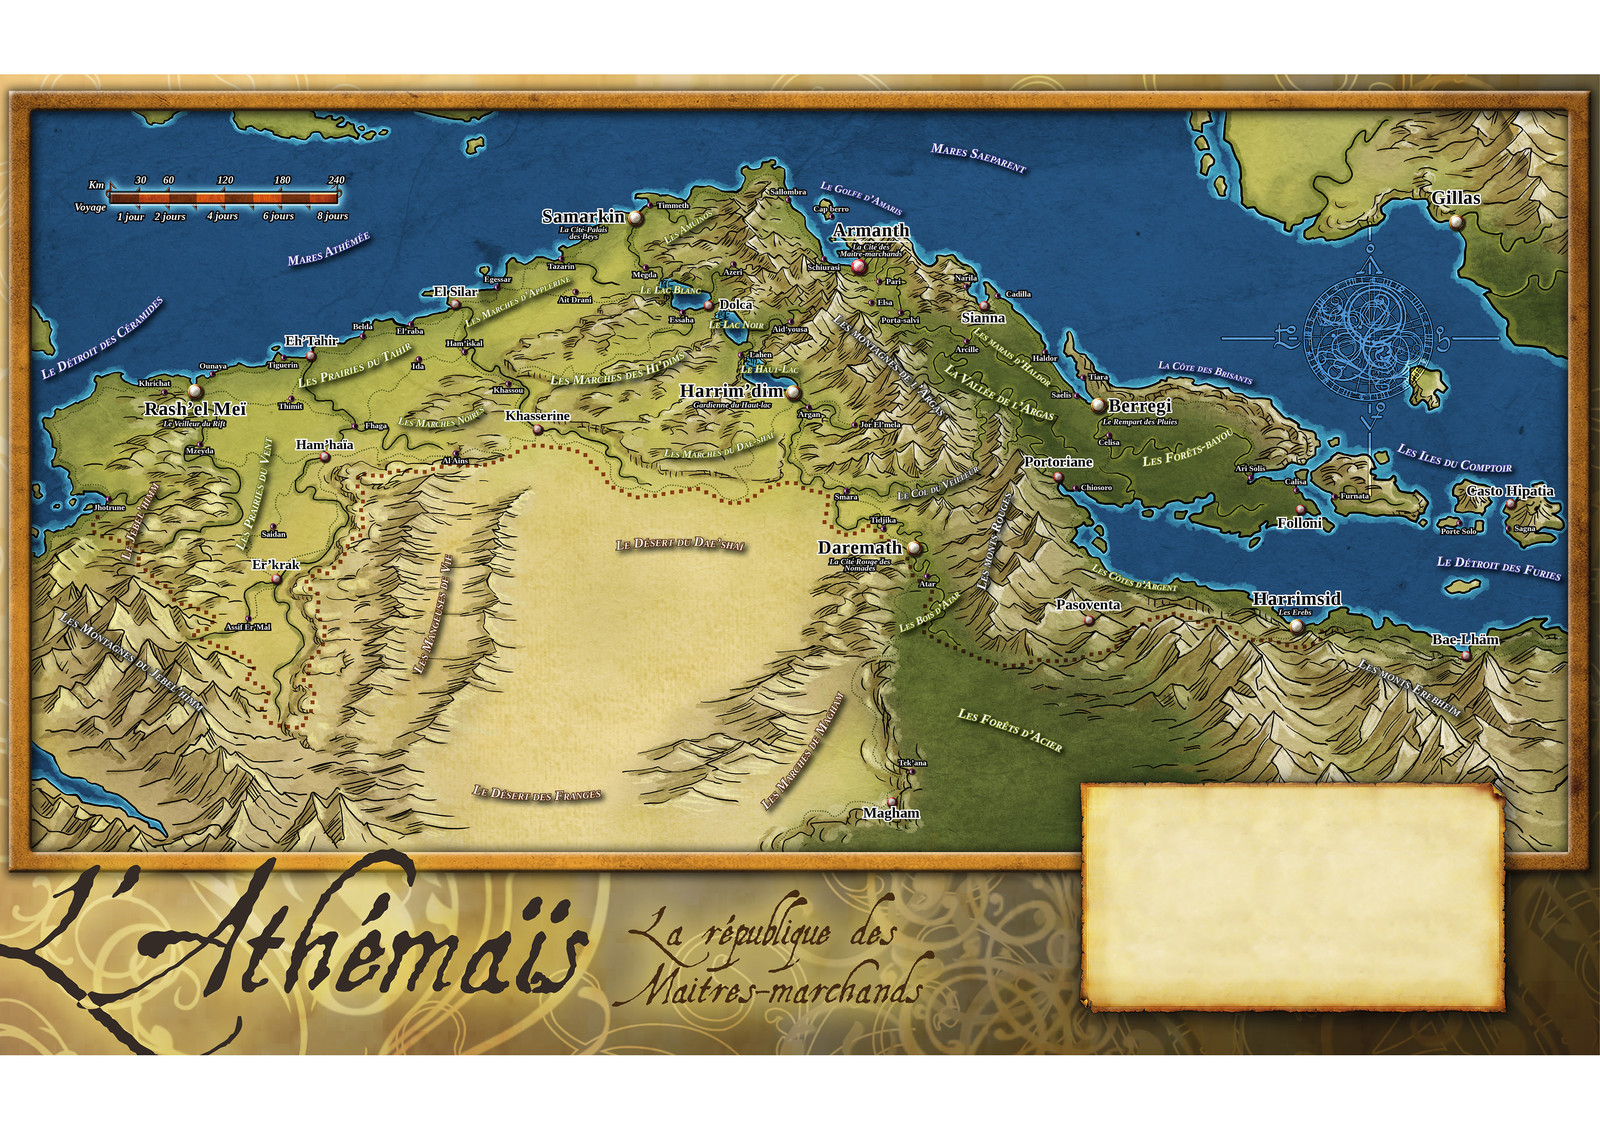 Athémaïs map full size, with names and places